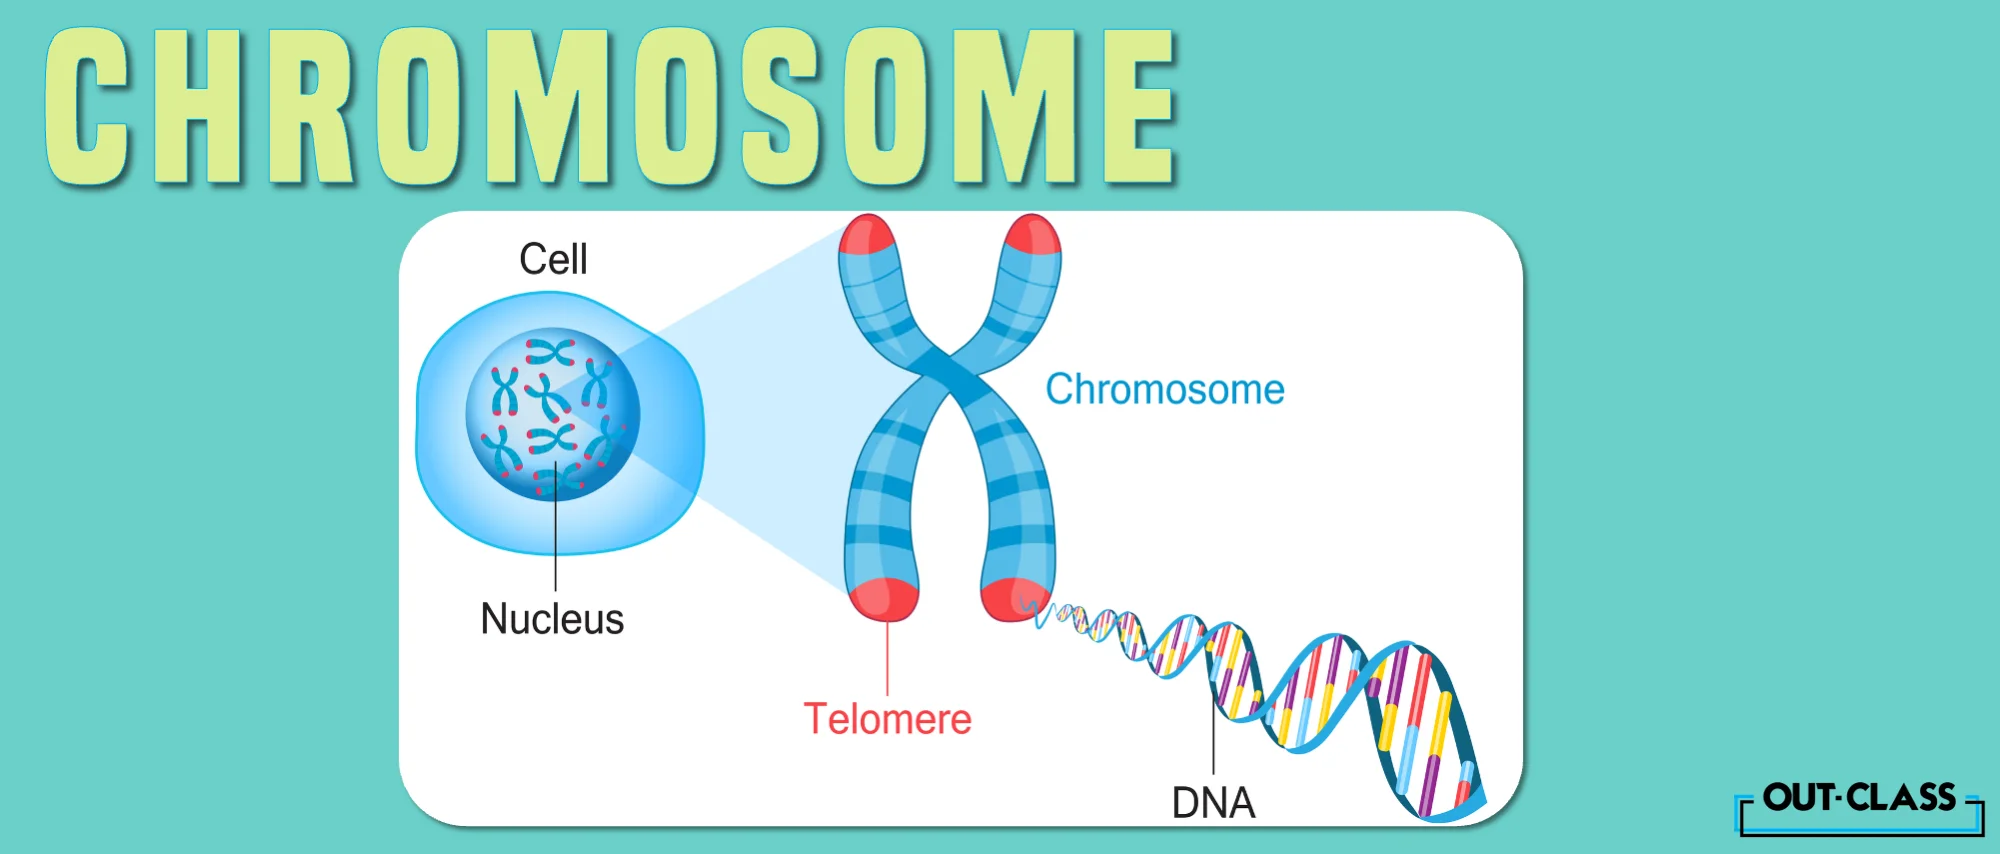 Chromosomes are located inside the nucleus of our cells and help provide the framework and structure that carry our genes or DNA. For moe information on how to get A* in O Level Biology, try Out-Class, a one-stop solution for online crash courses.